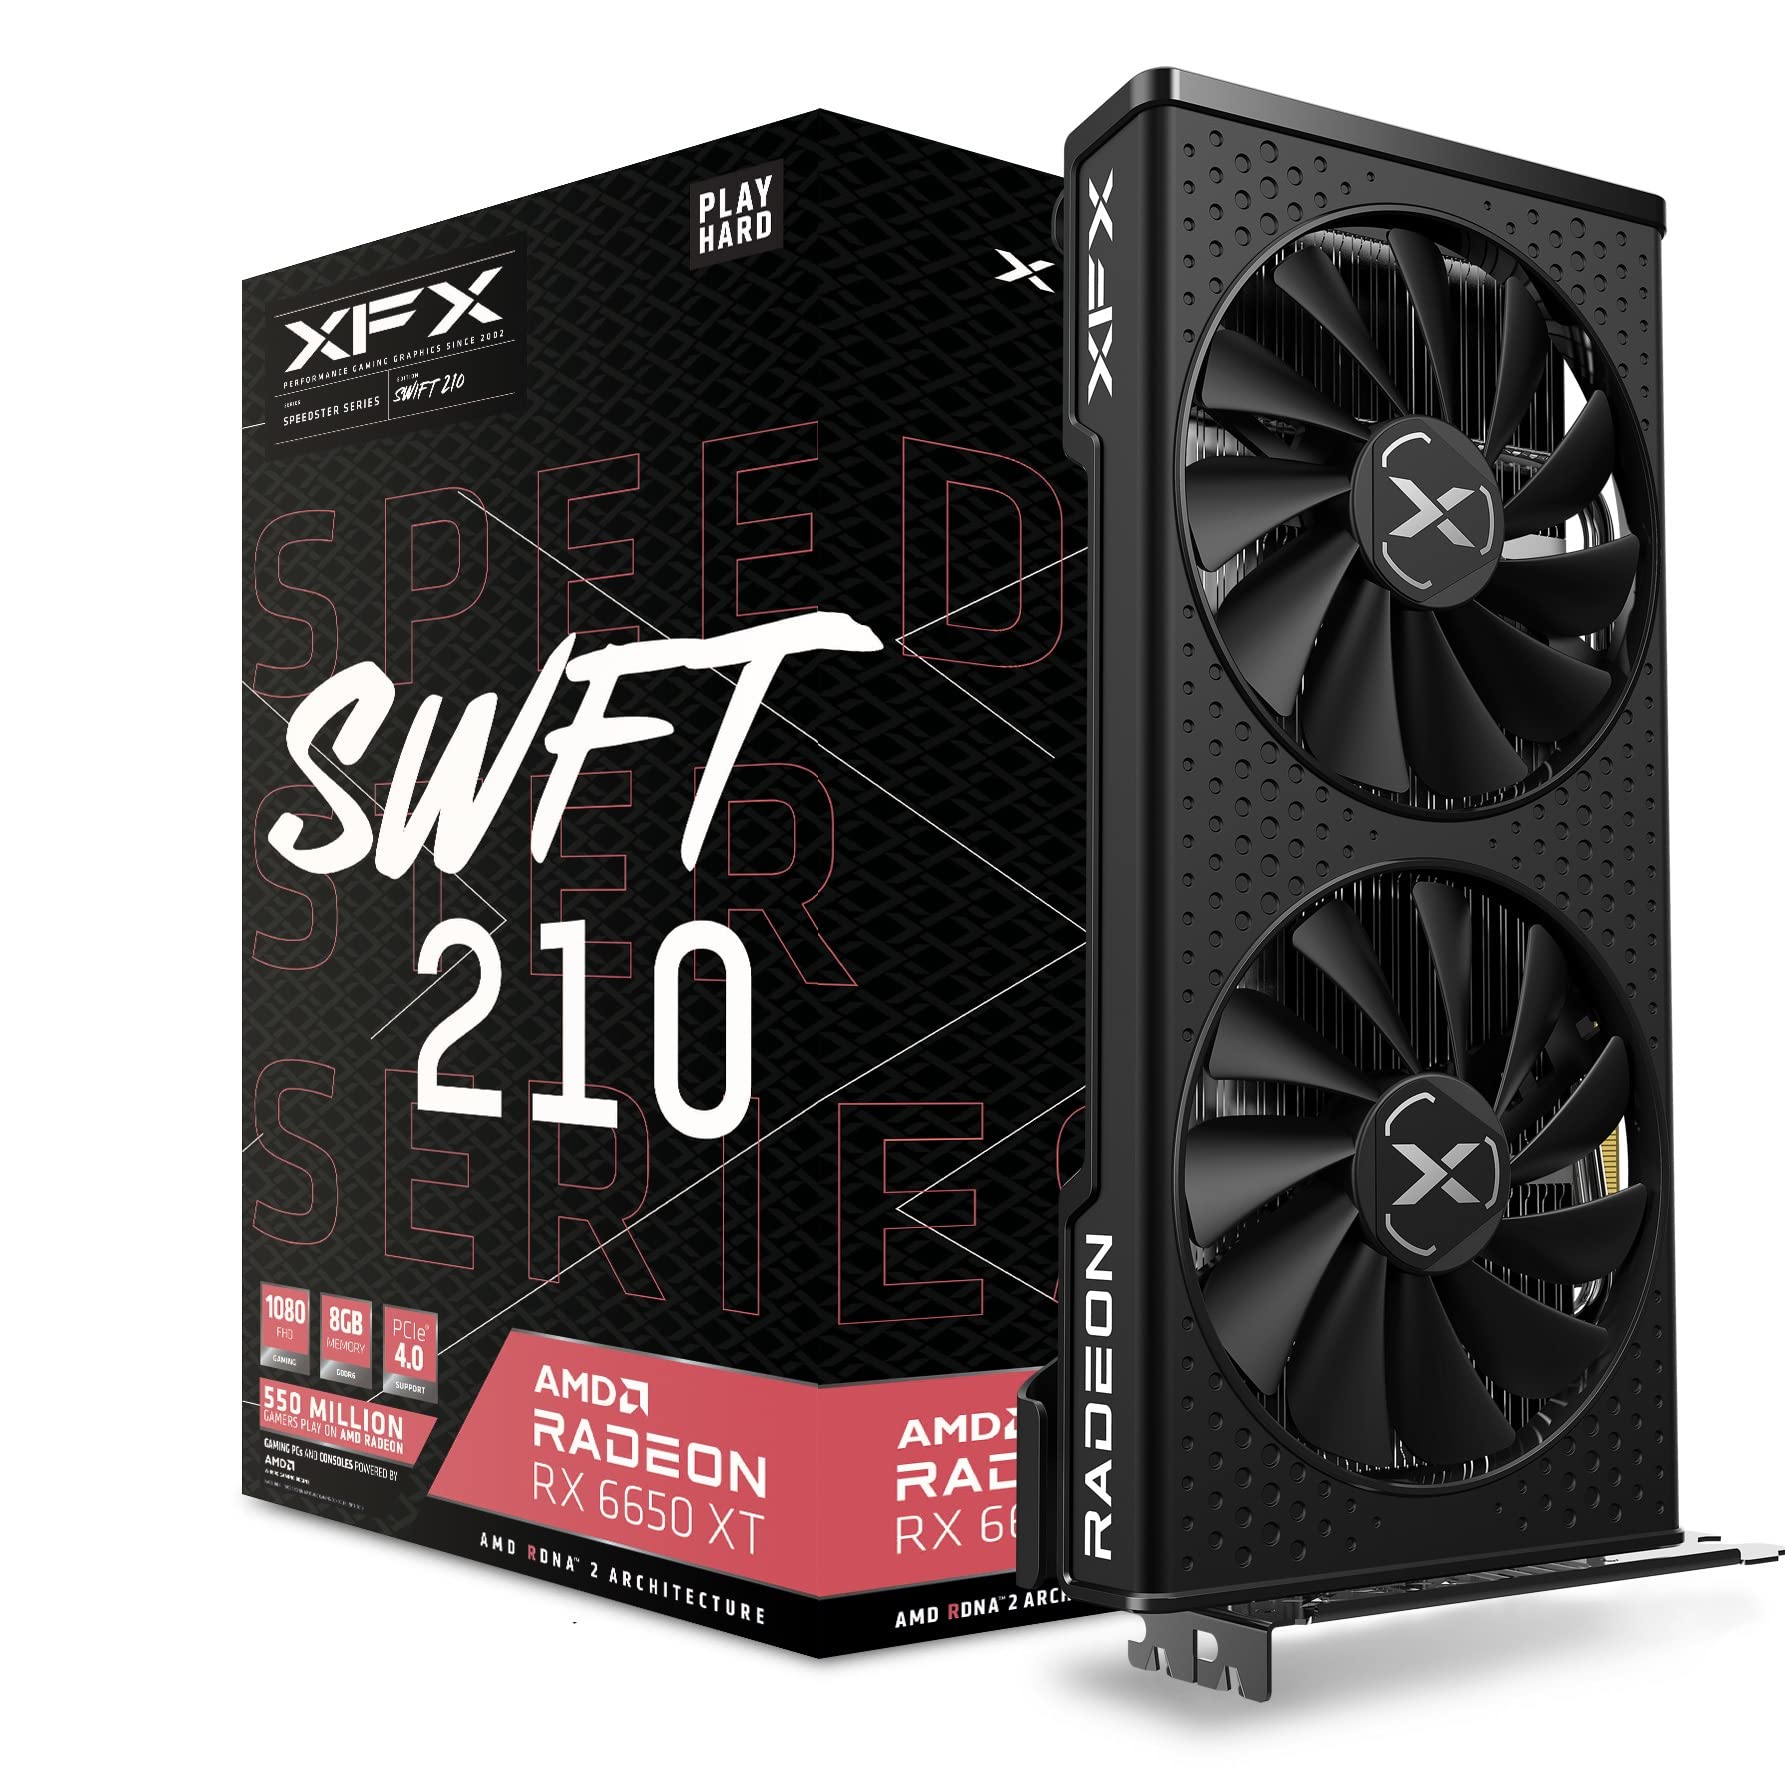 XFX Speedster SWFT210 Radeon RX 6650XT CORE Gaming Graphics Card $220.53 + Free Shipping